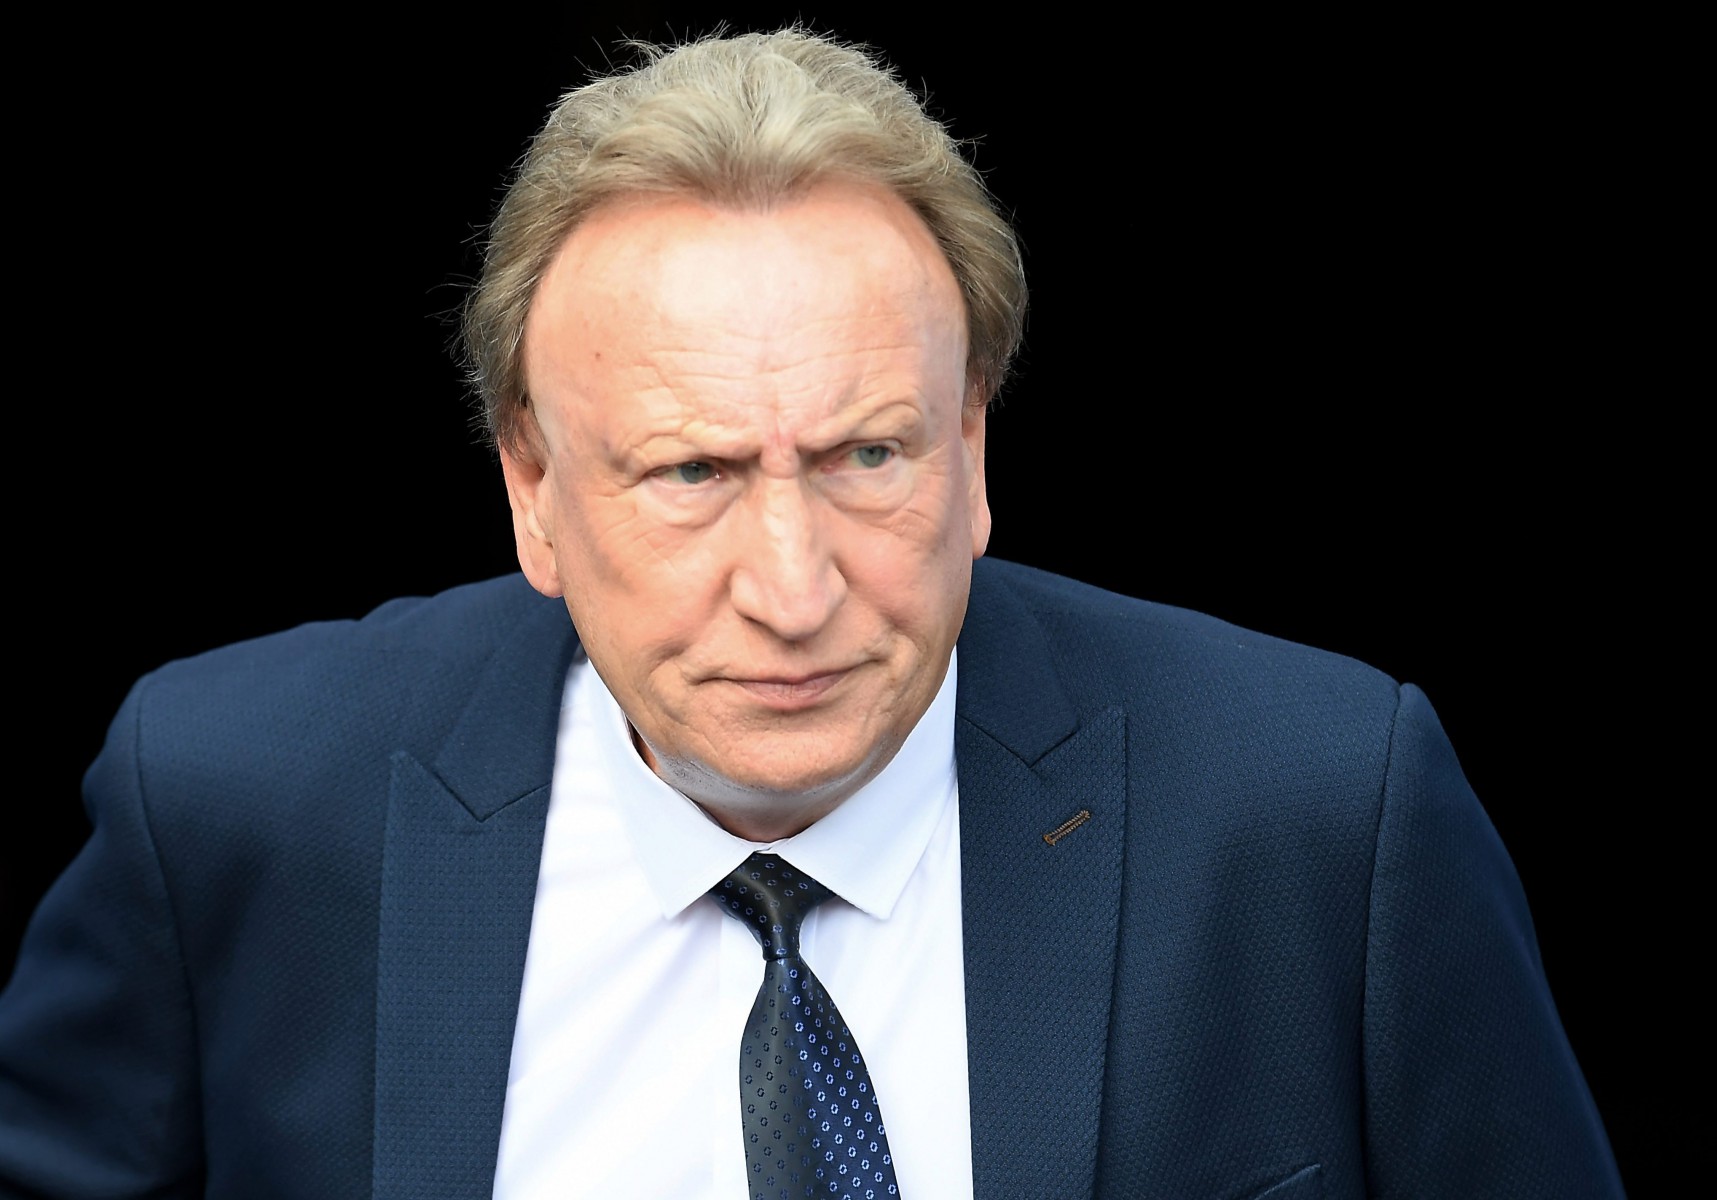 , Neil Warnock, 71, set for shock return to management with Middlesbrough as Woodgate nears sack